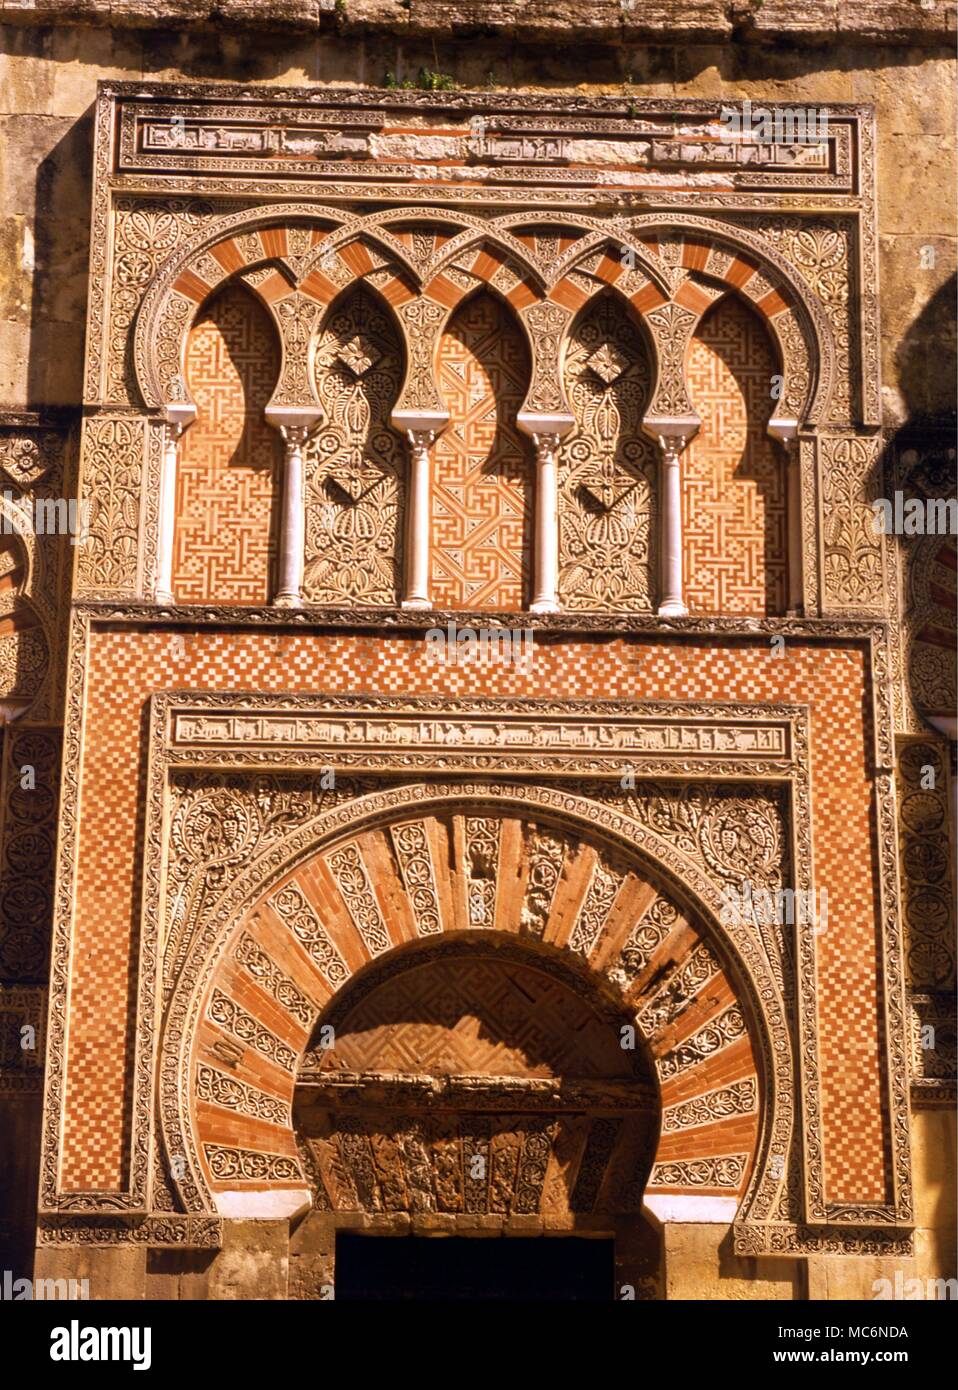 Spain Cordoba architectural detail of Mosque doorway Stock Photo